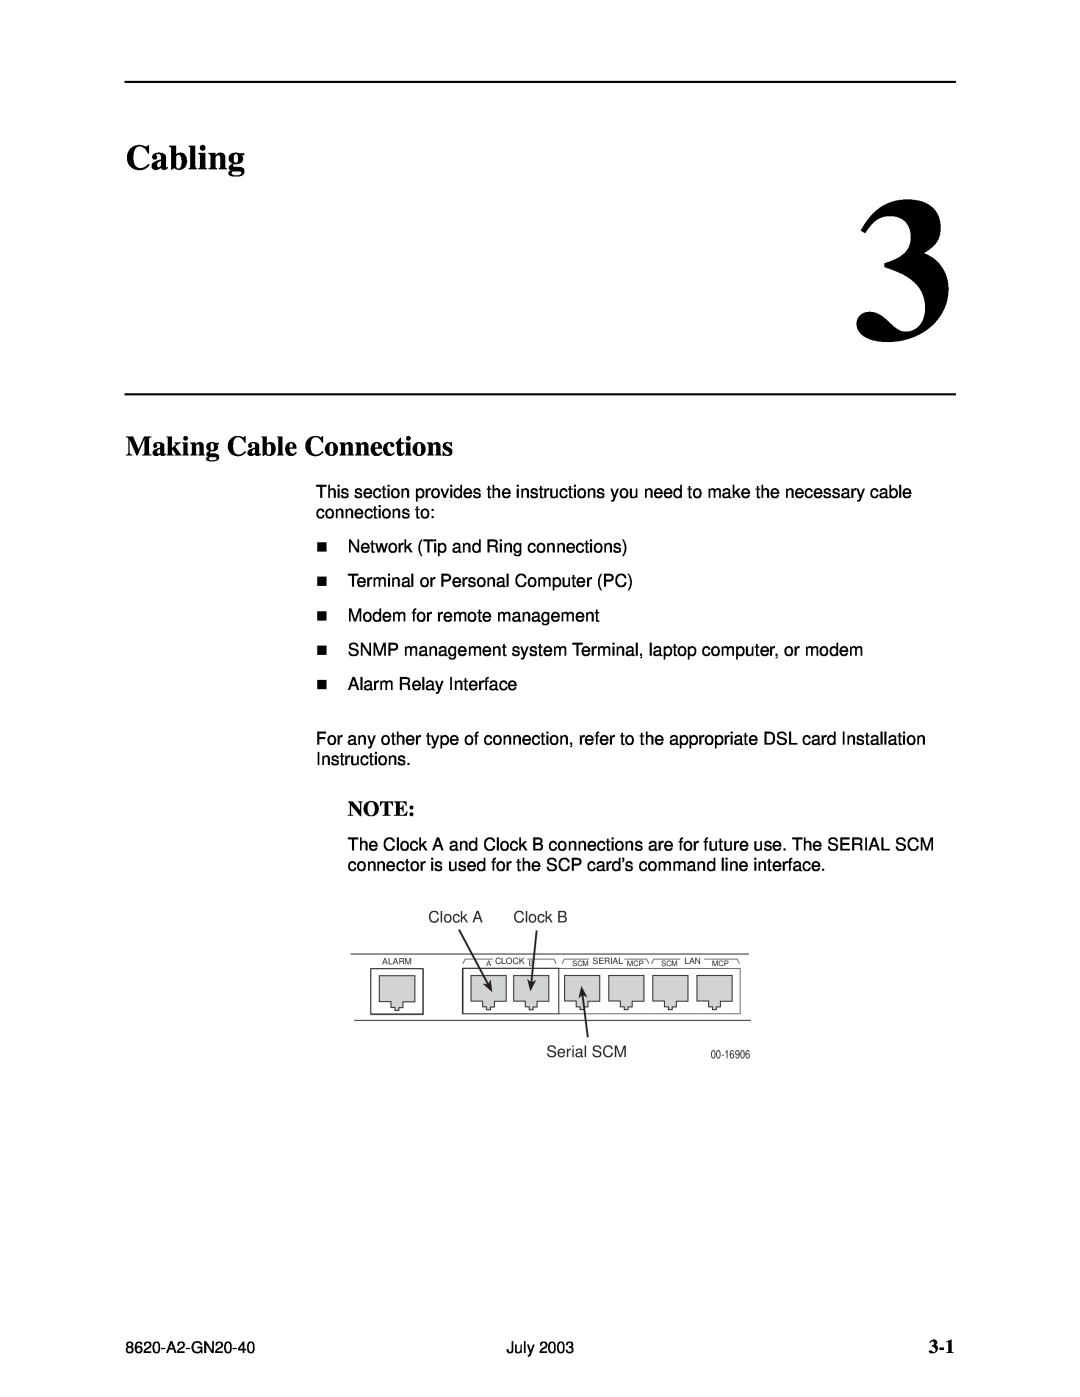 Paradyne Hotwire 8620 GranDSLAM Installation Guide manual Cabling, Making Cable Connections 